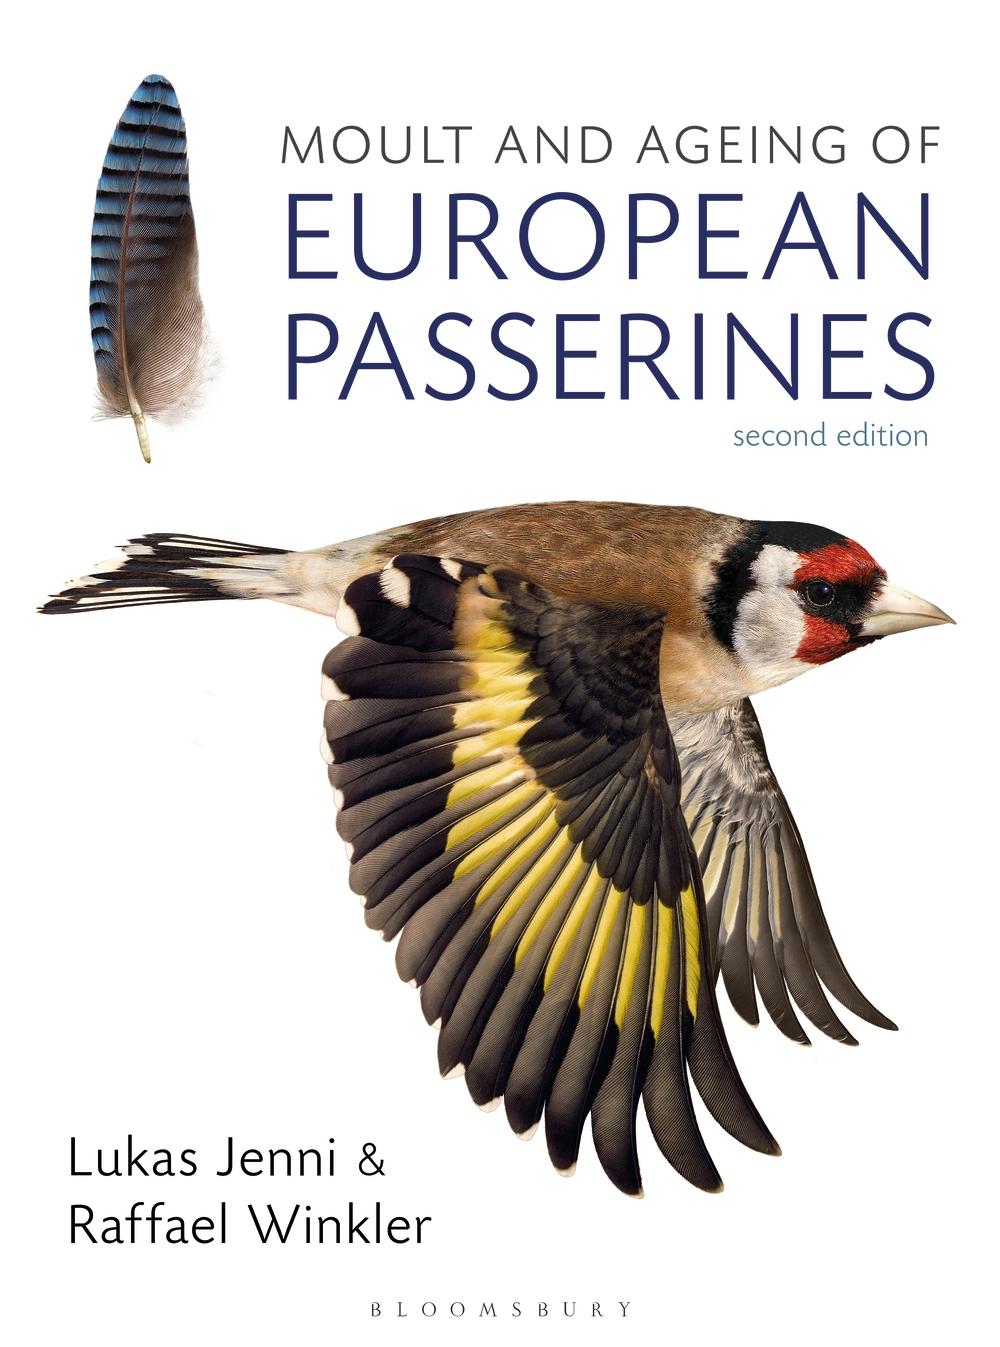 Moult and Ageing of European Passerines - Lukas Jenni